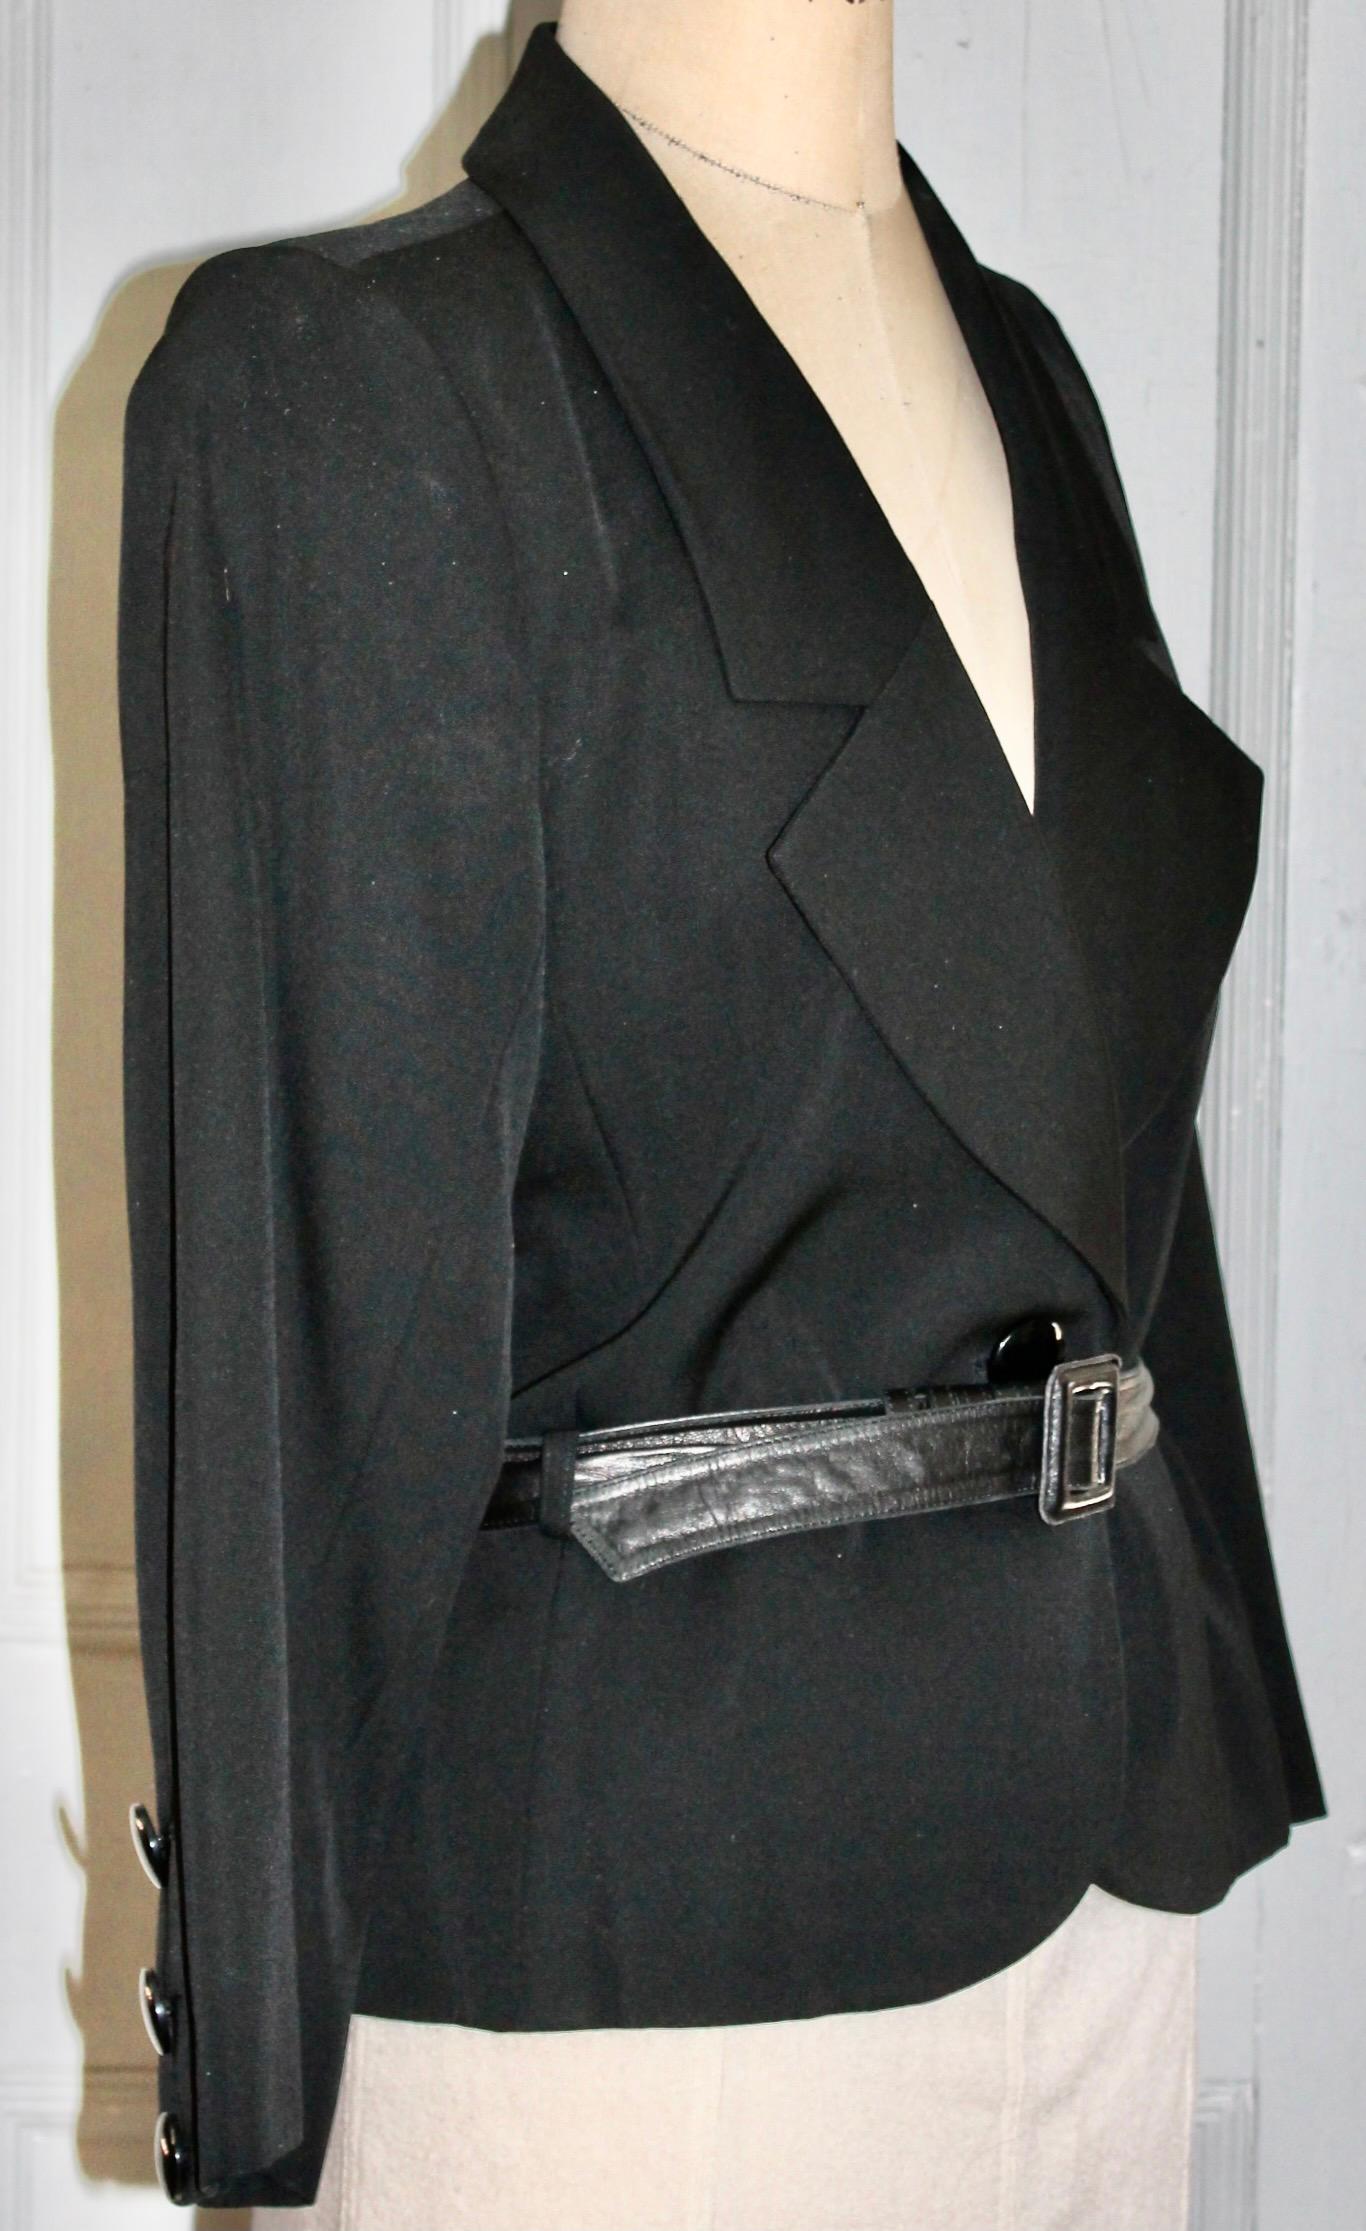 Yves Saint Laurent 1980's Black 'Tuxedo' Jacket with Leather Belt In Good Condition For Sale In Sharon, CT